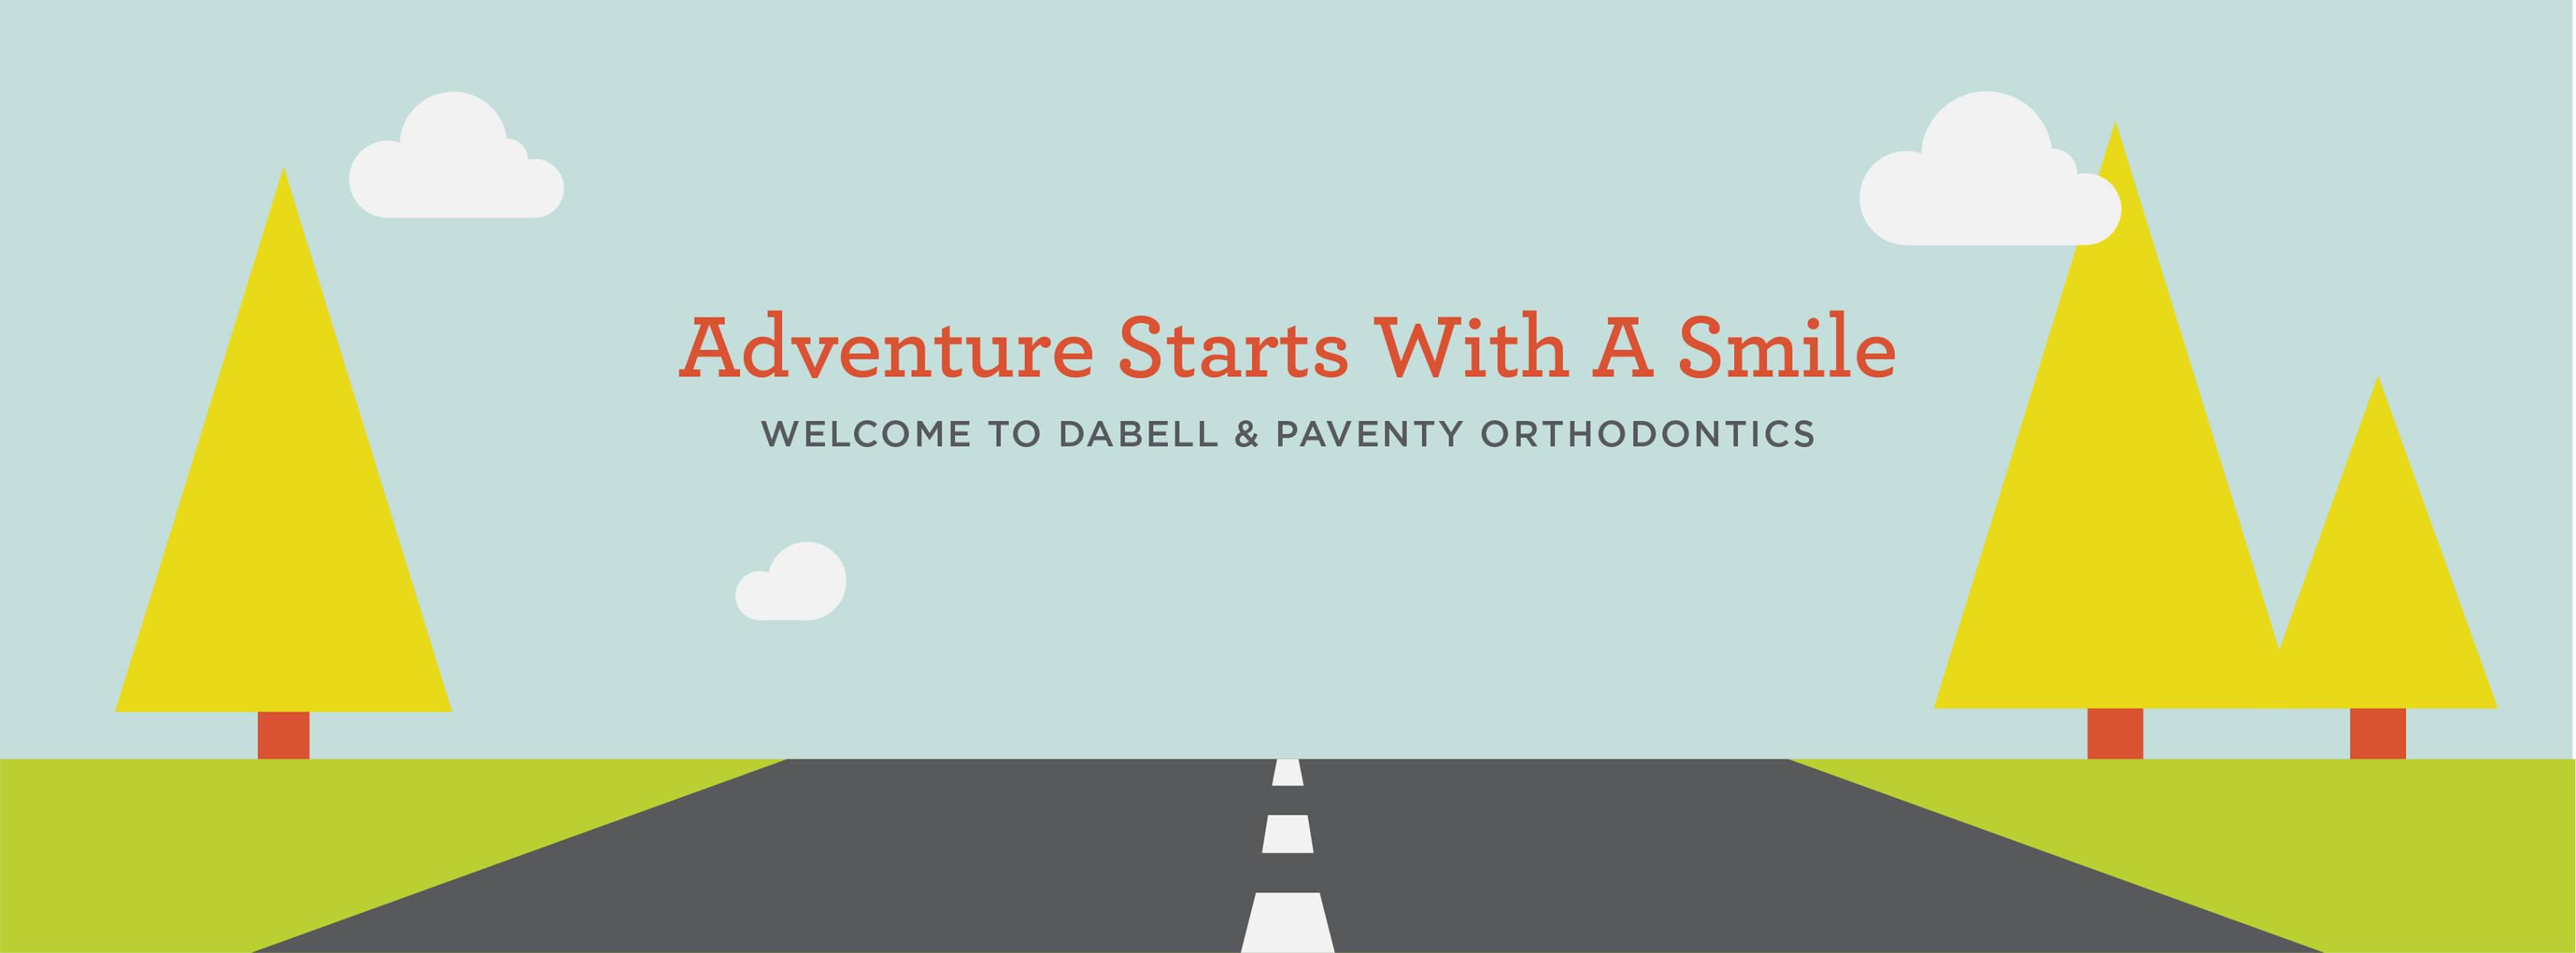 Adventure Starts With a Smile at DaBell and Paventy Orthodontics